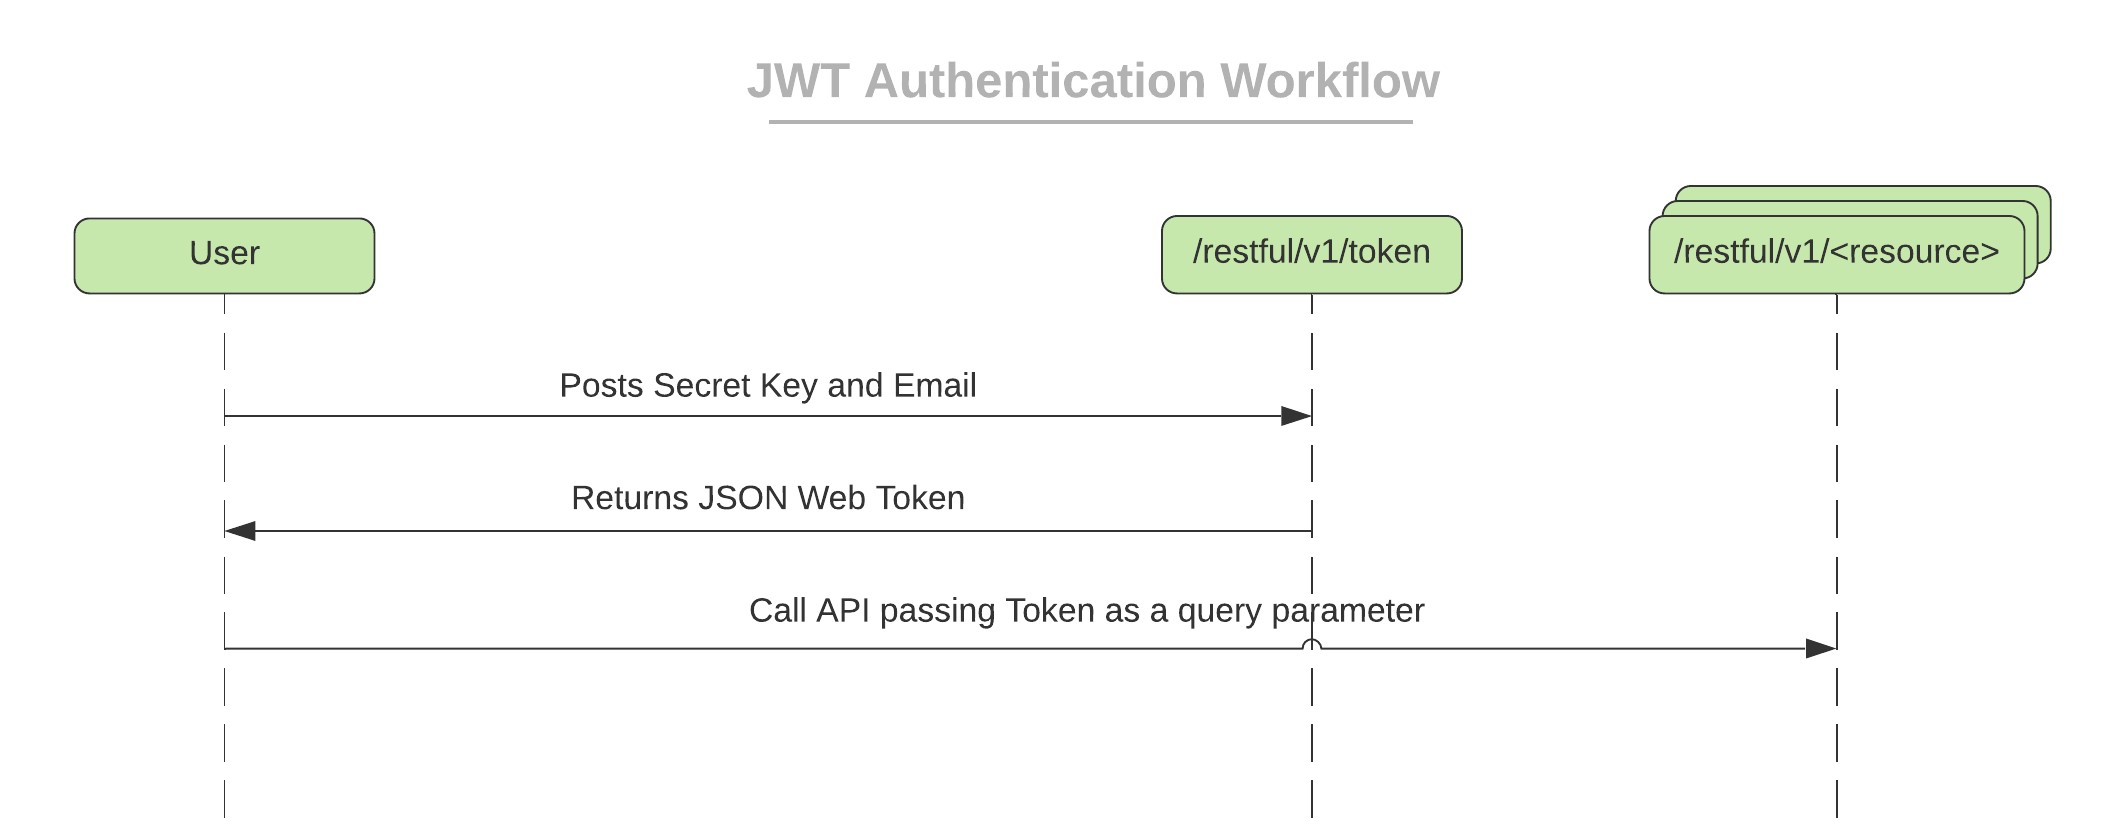 JWT_Authentication_Workflow_cropped.jpg